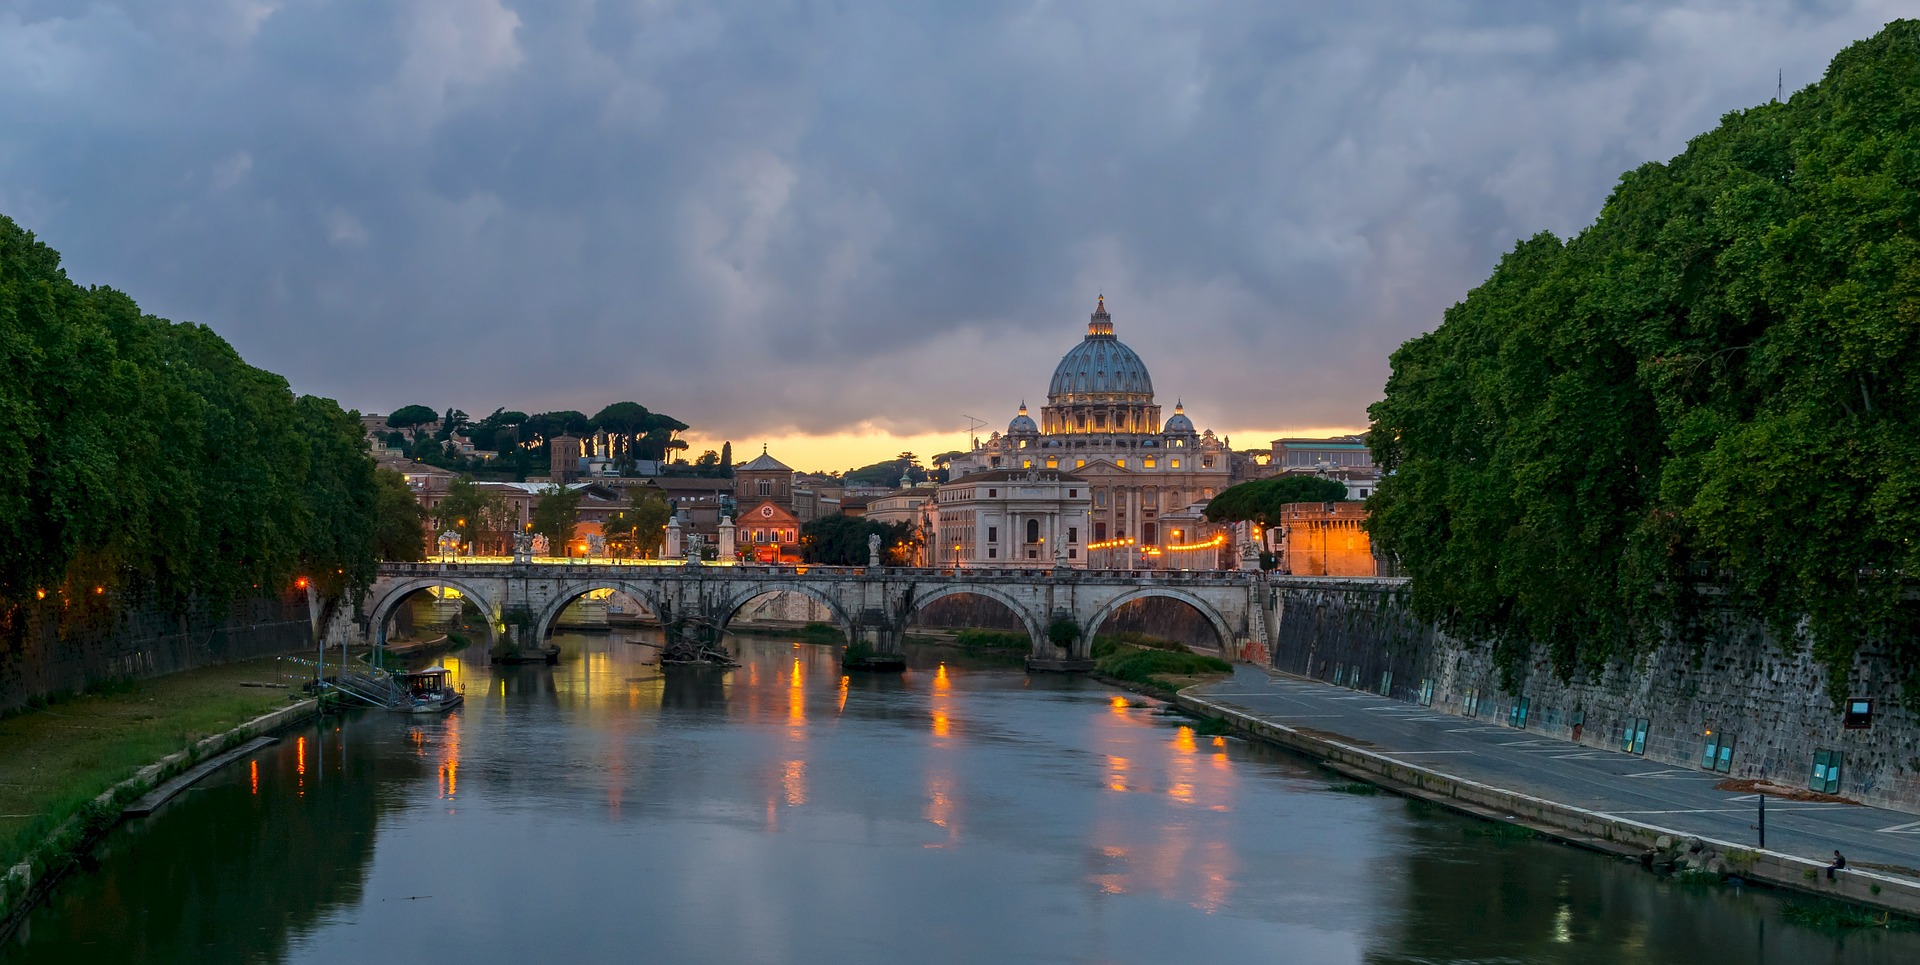 River Tiber lined with trees and the view of the St Peter's Basilica